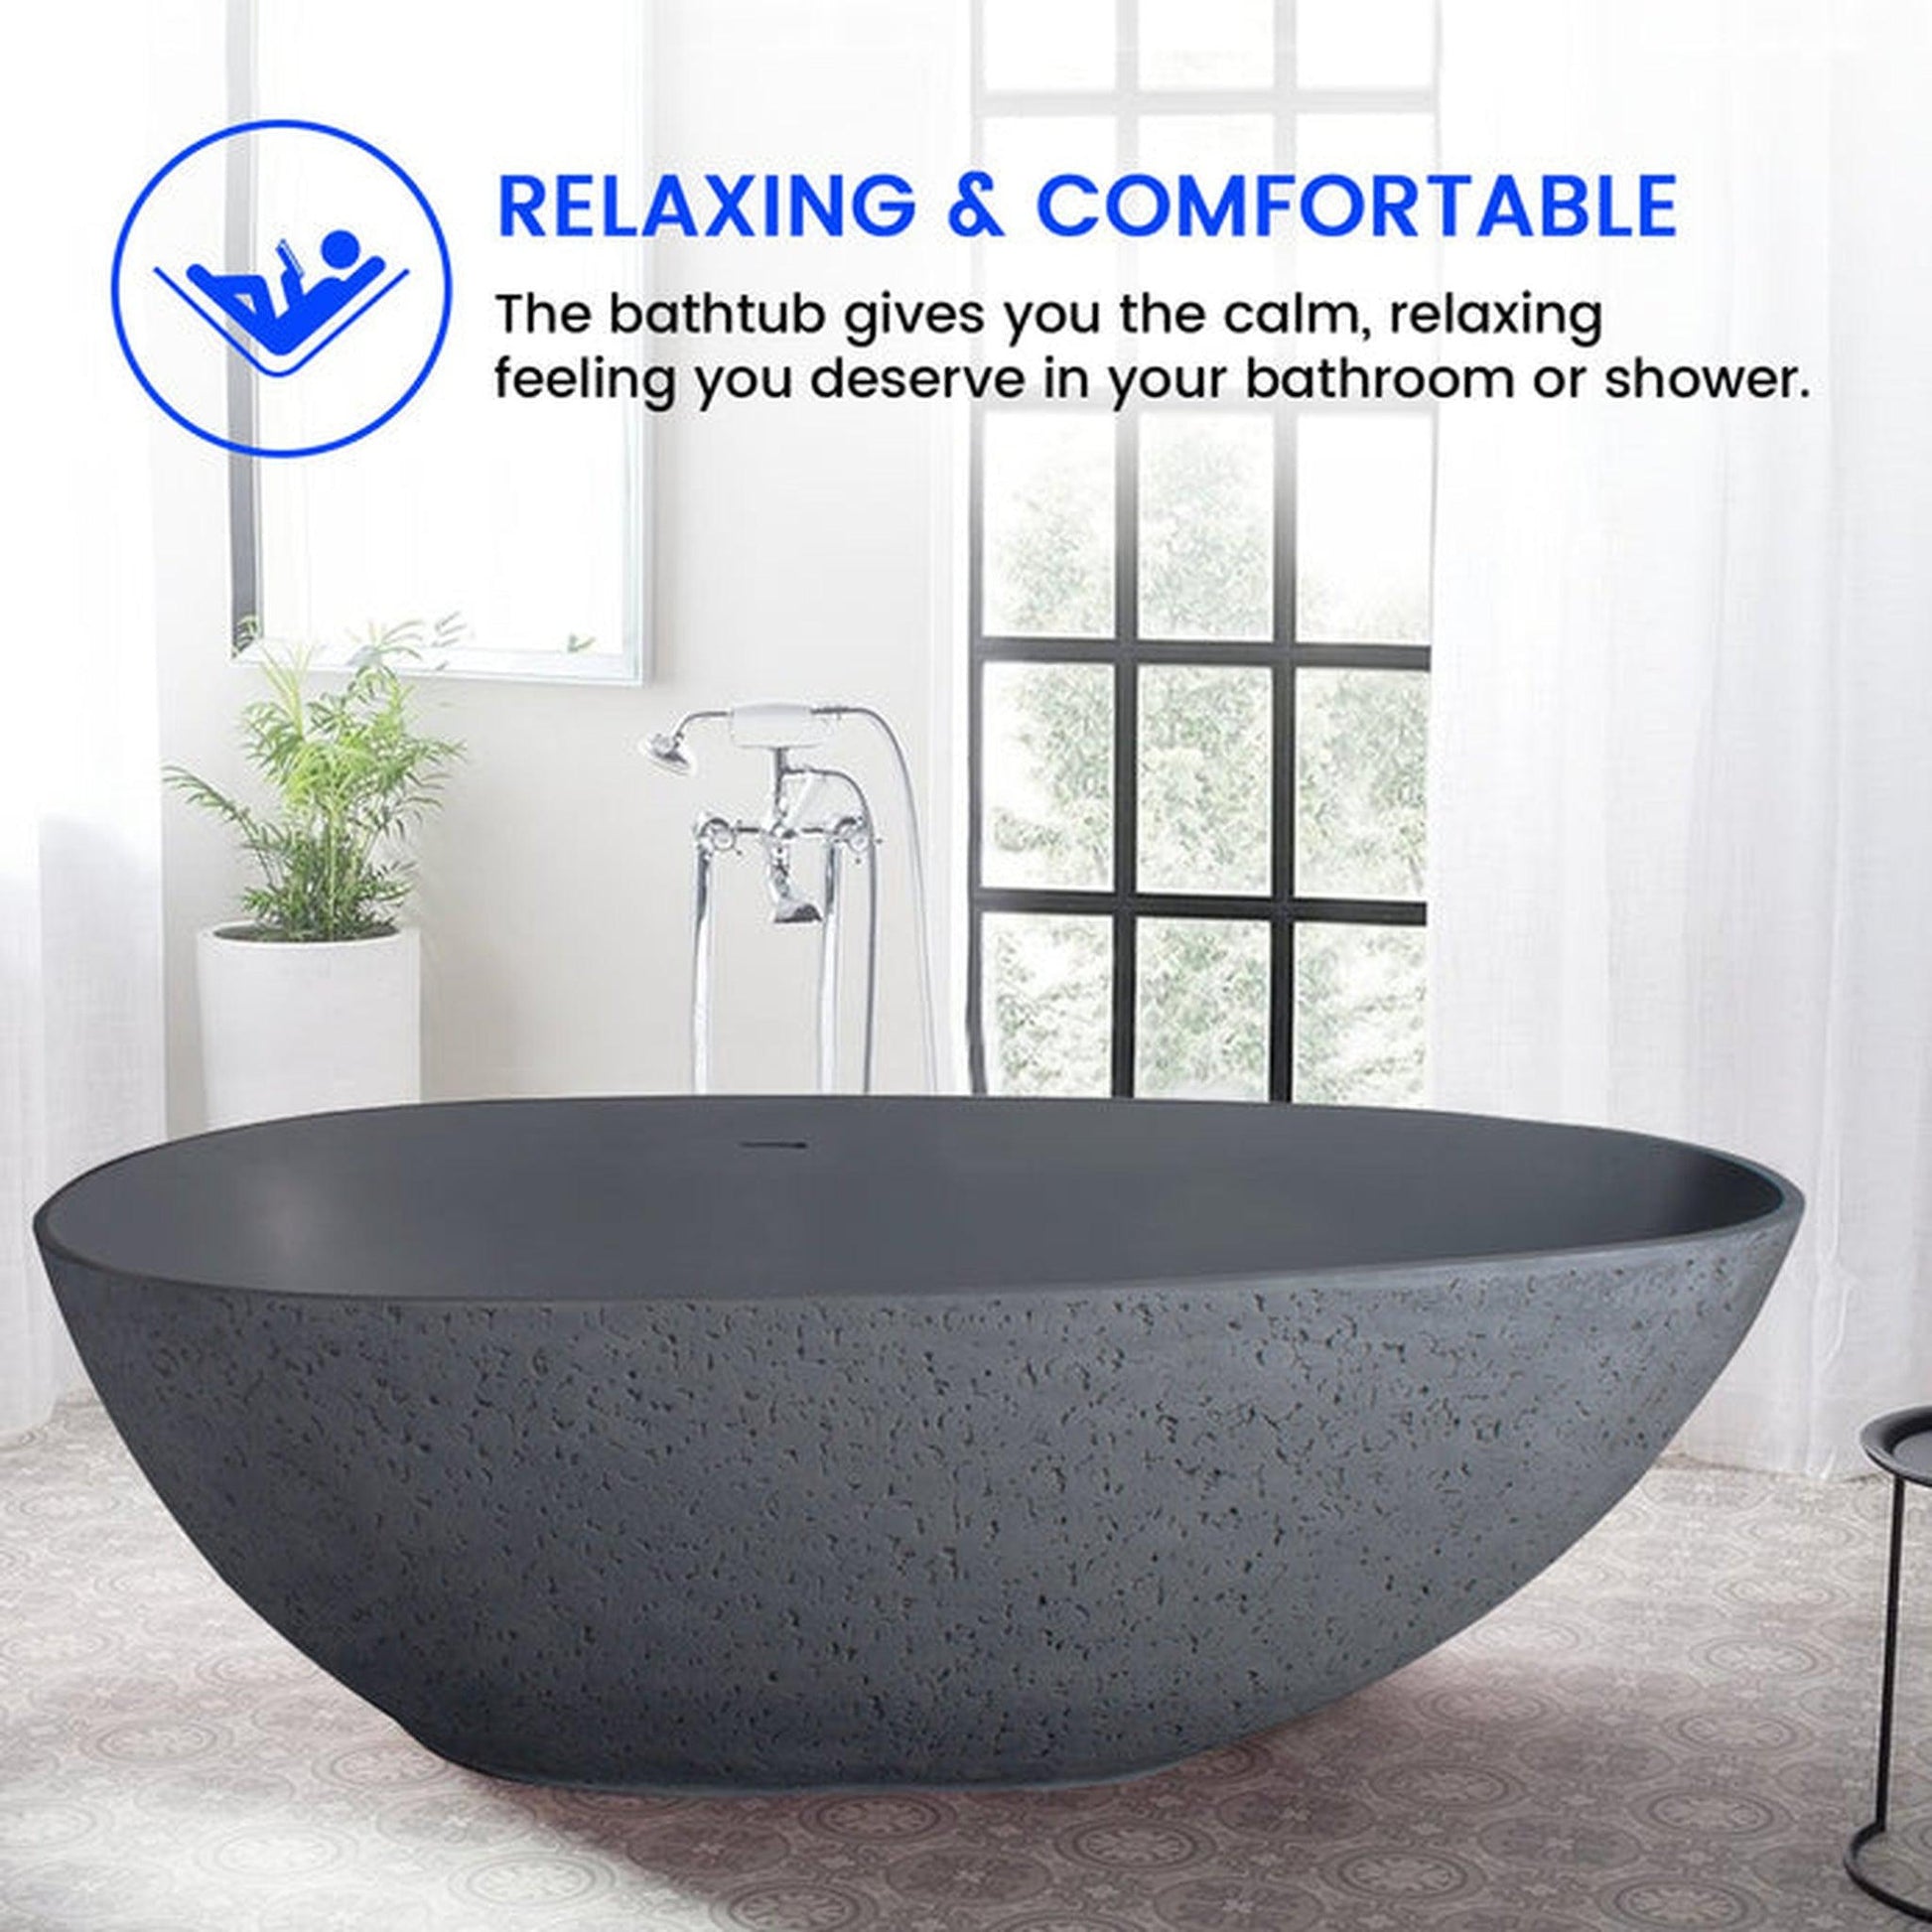 Vanity Art 67" W x 22" H Gray Solid Surface Resin Stone Freestanding Soaking Bathtub With Slotted Overflow and Pop-up Drain